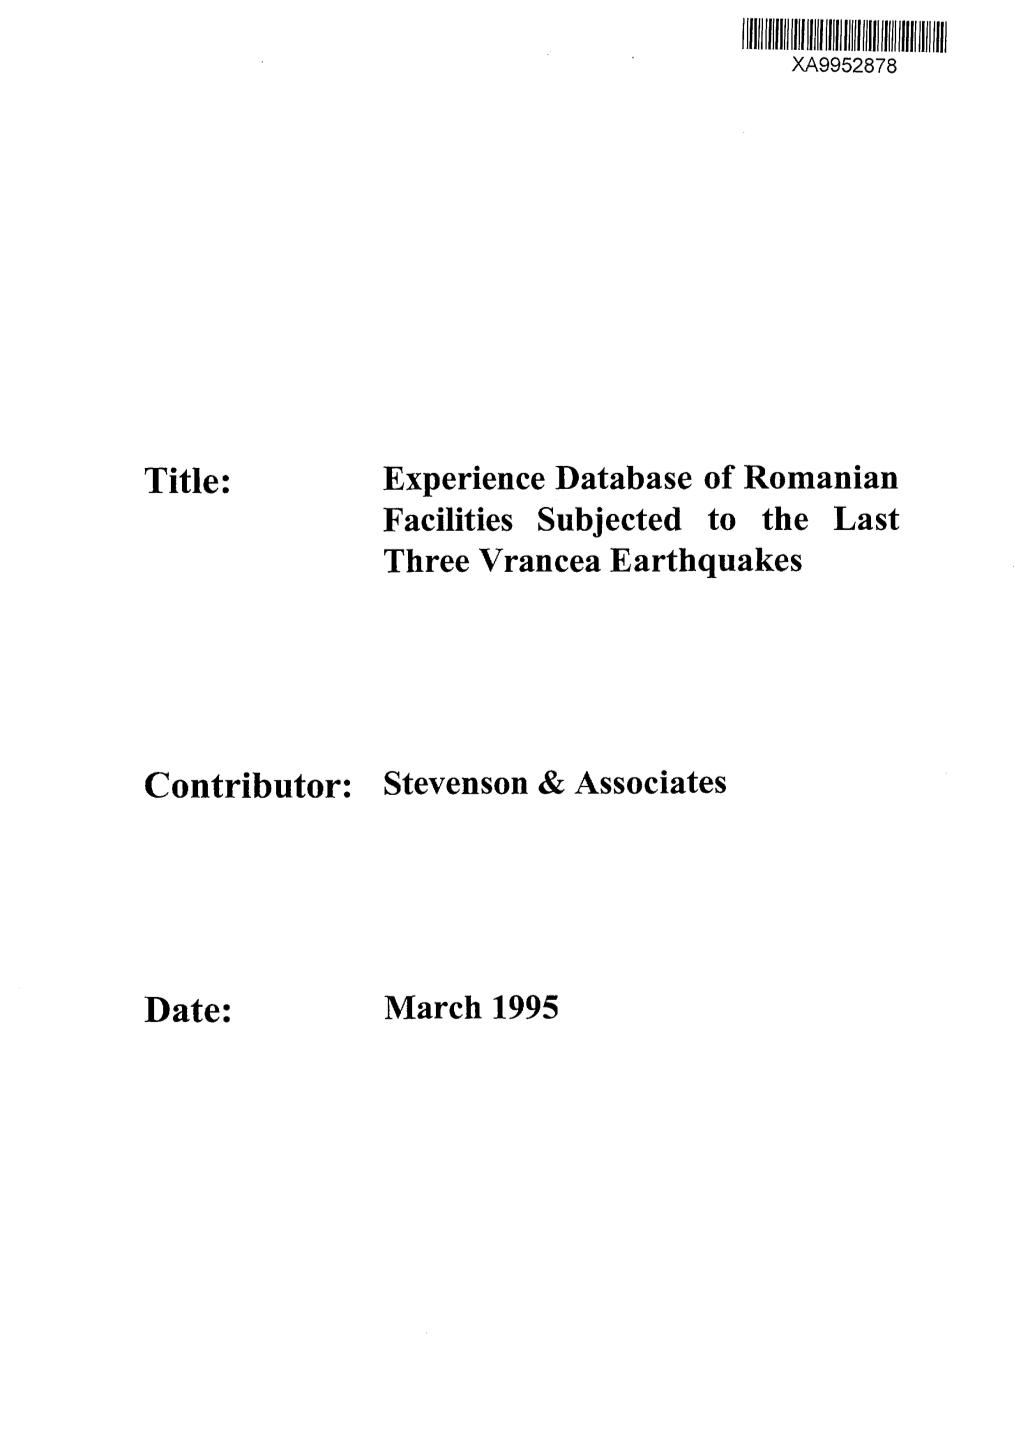 Experience Database of Romanian Facilities Subjected to the Last Three Vrancea Earthquakes